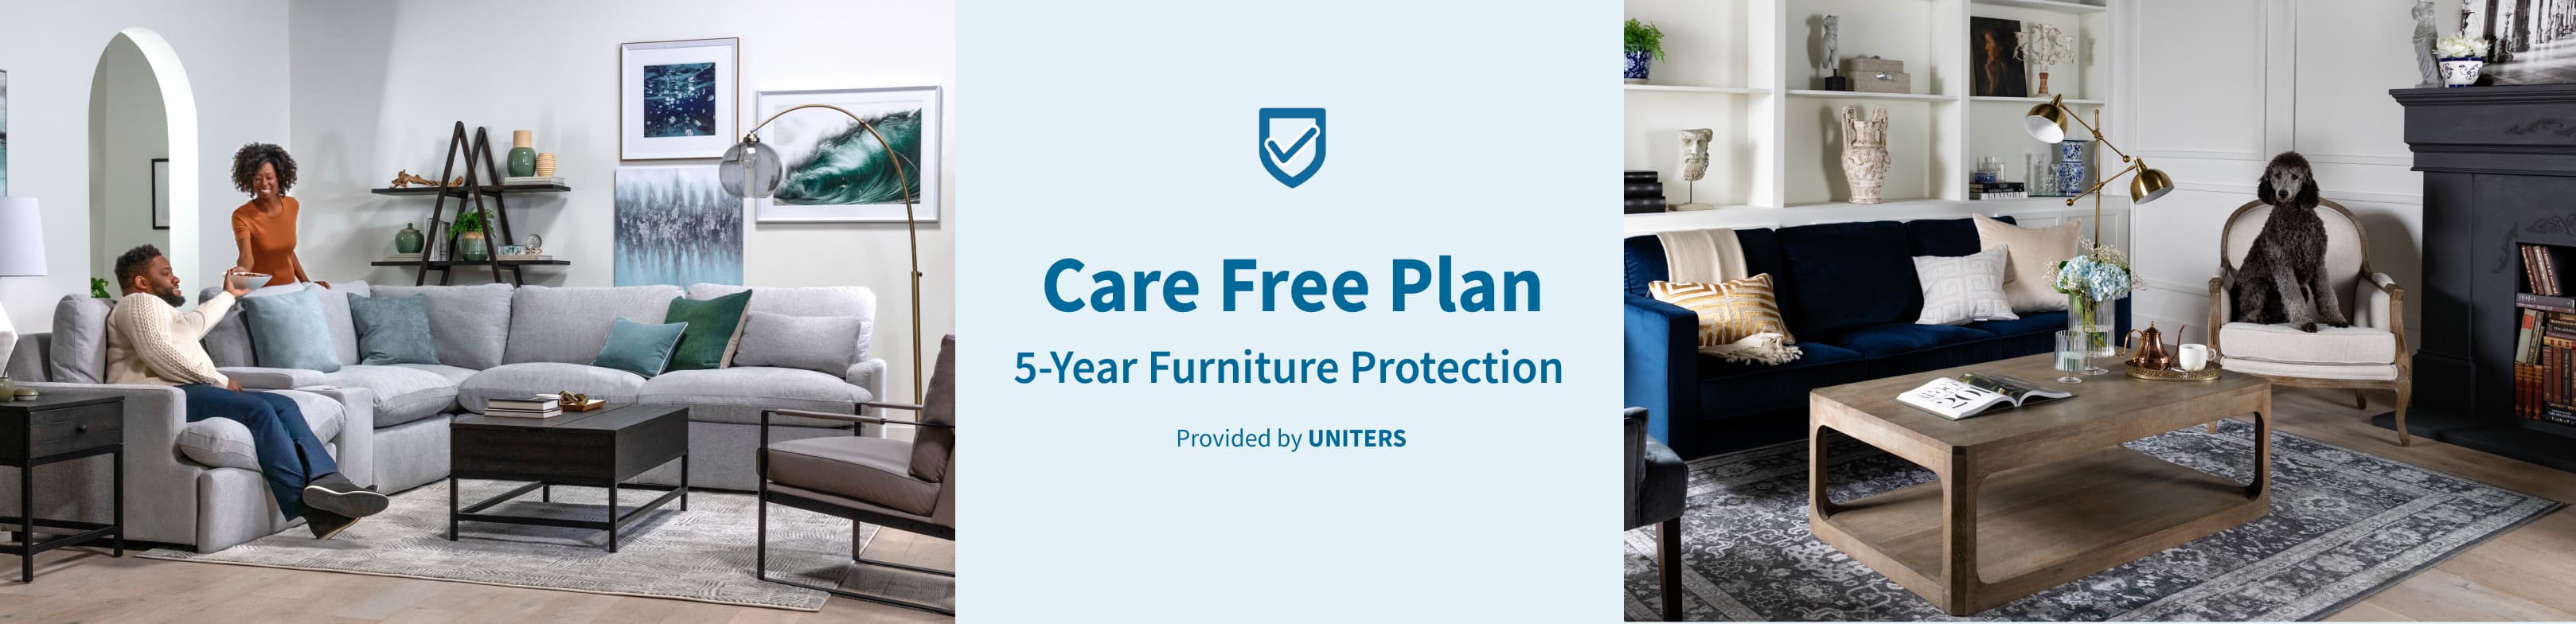 Care Free Plan 5-Year Furniture Protection Provided by UNITERS